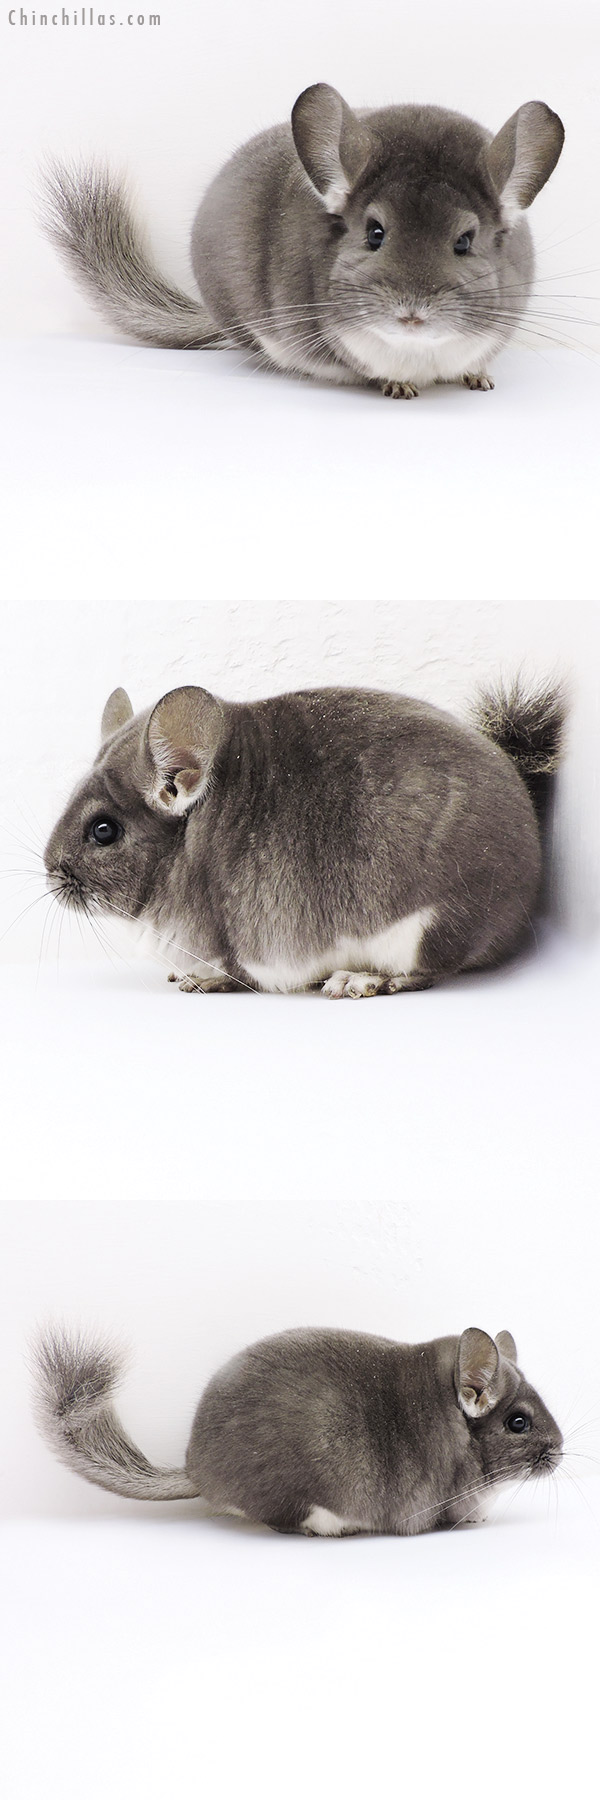 Chinchilla or related item offered for sale or export on Chinchillas.com - 18164 Large Premium Production Quality Violet Female Chinchilla